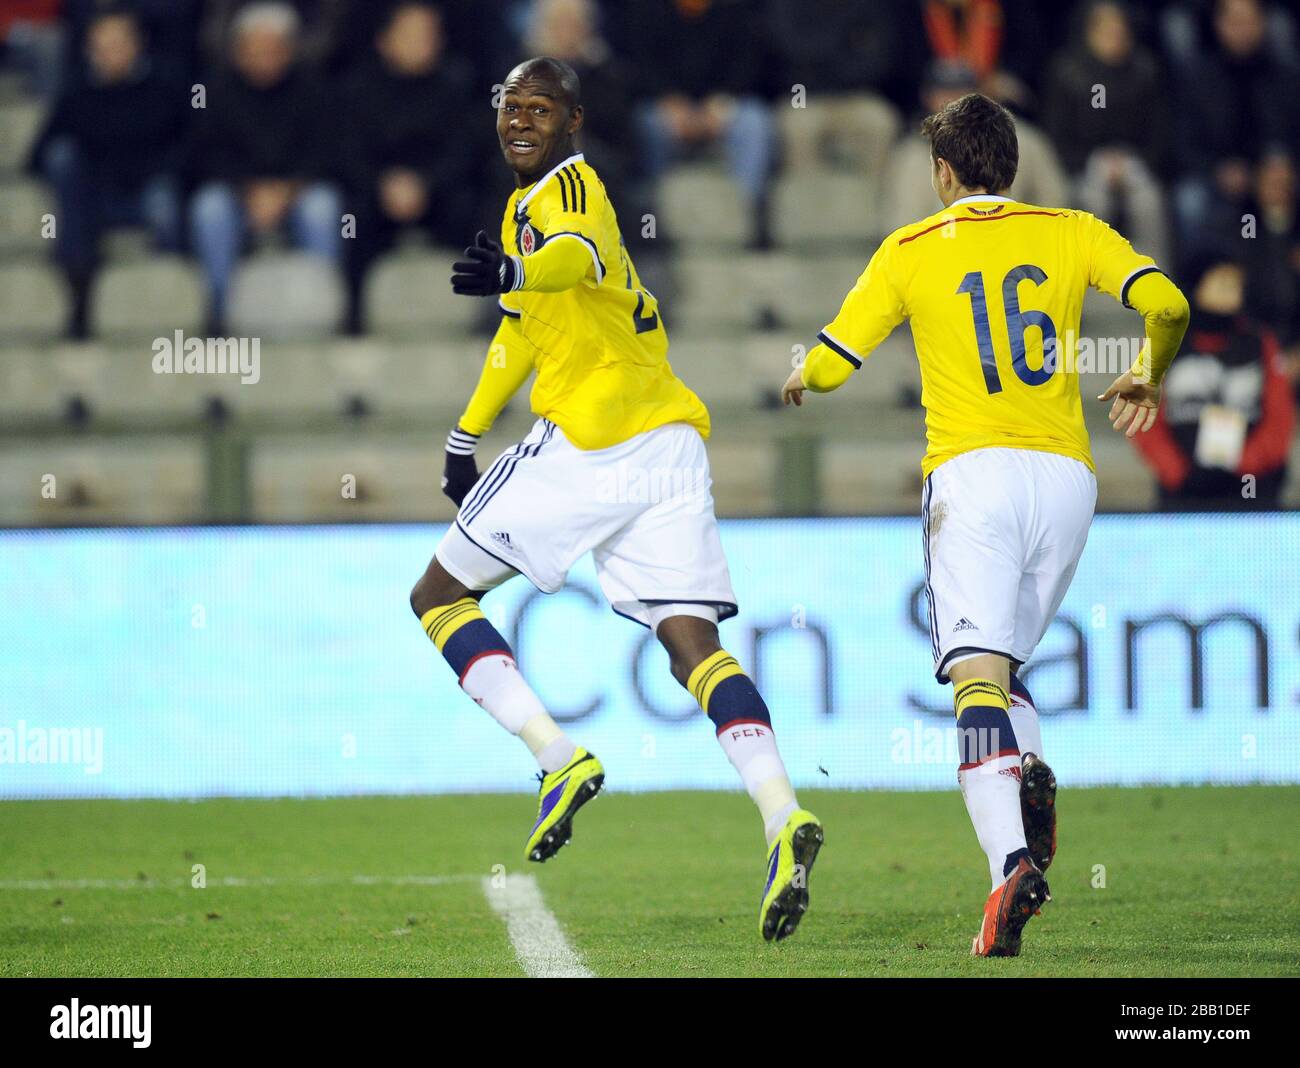 Colombia's Victor Ibarbo celebrates scoring the second goal Stock Photo